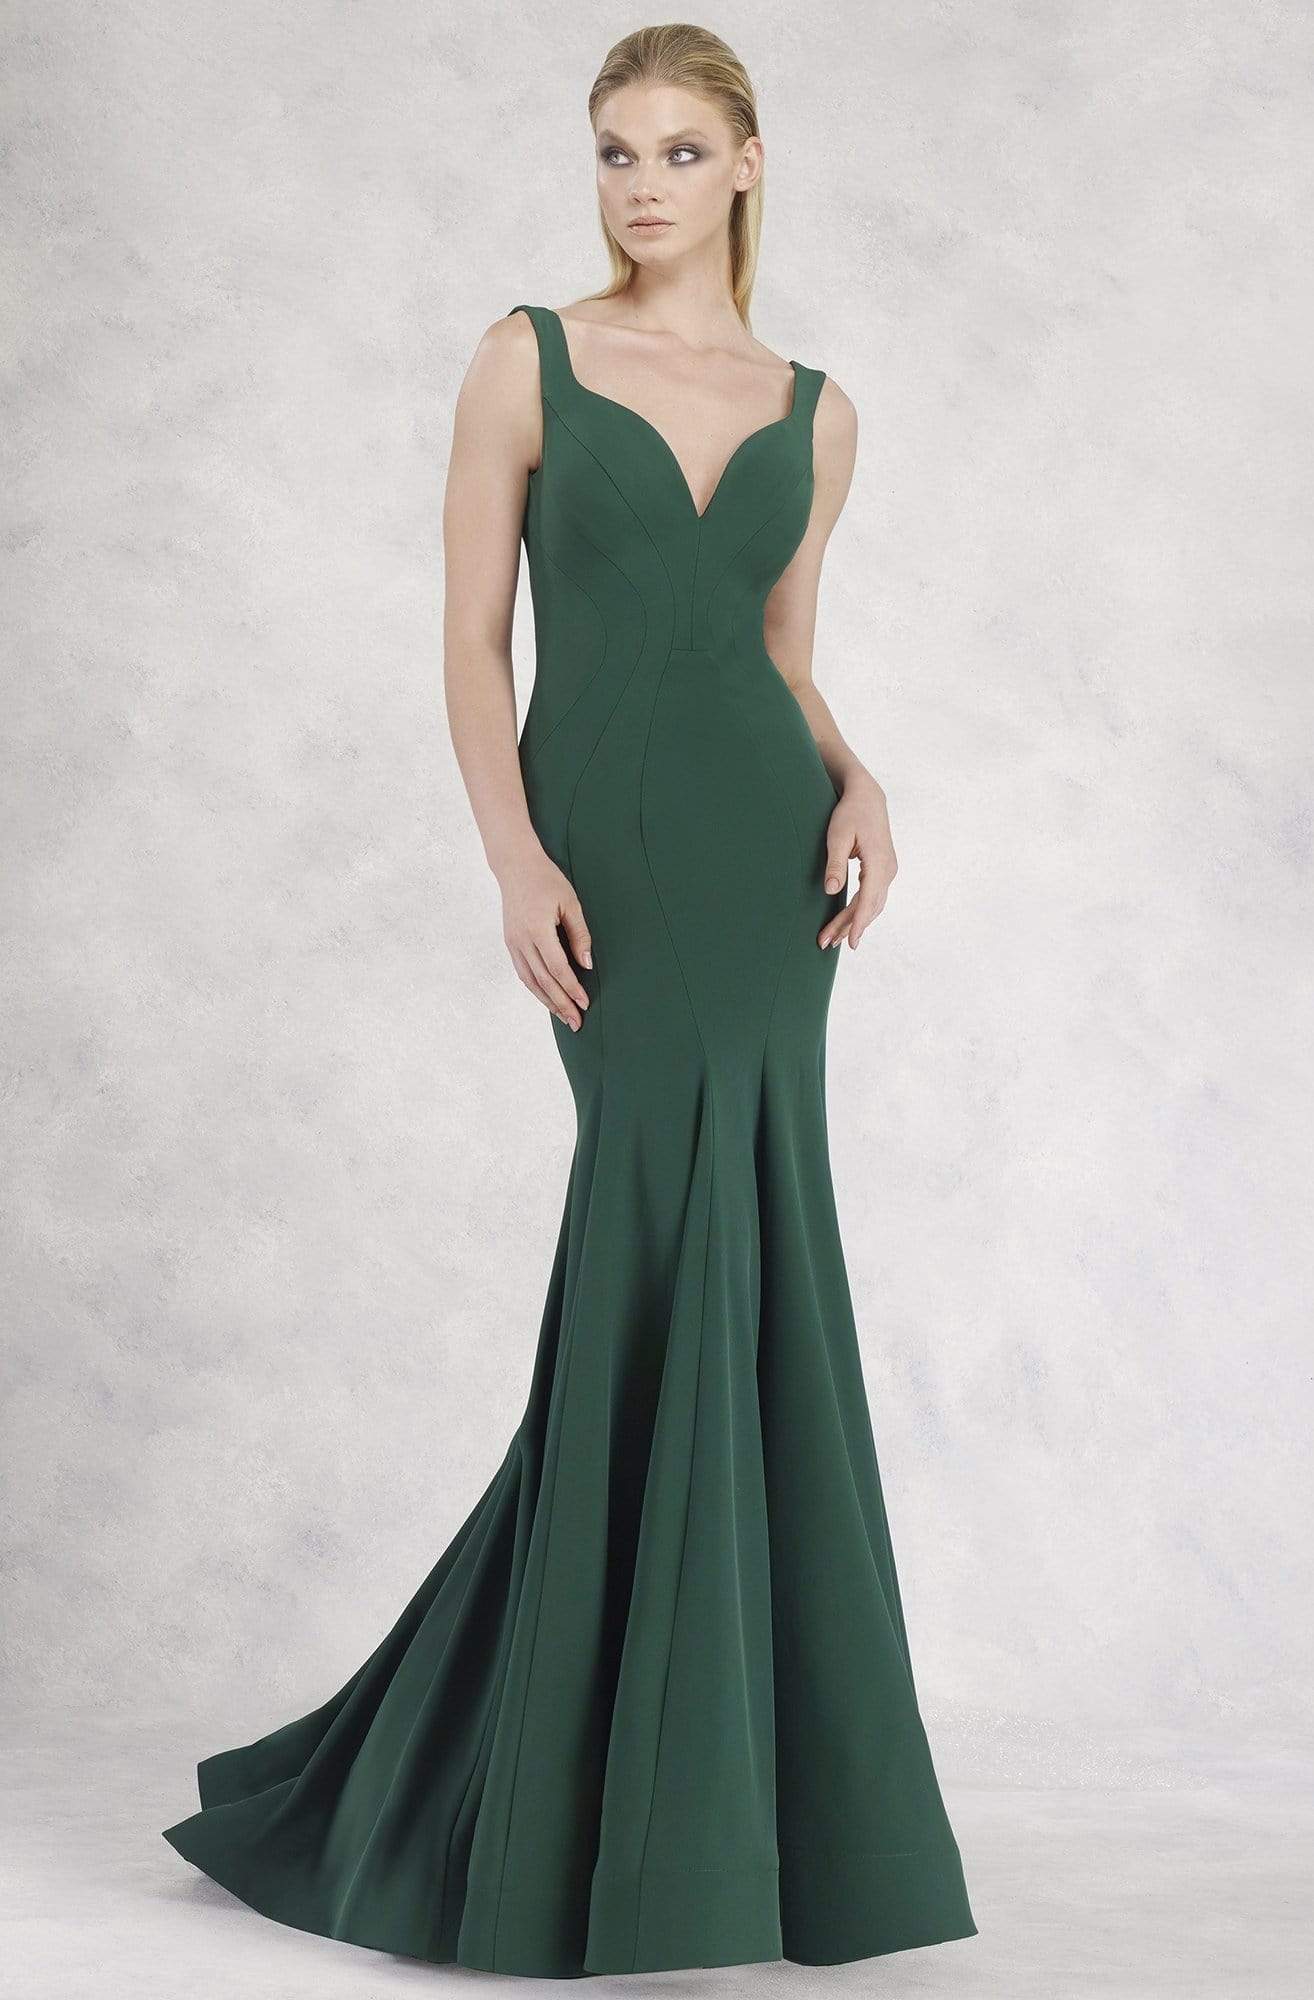 Janique - JQ1820 Sleeveless Vibrant Crepe Mermaid Gown Special Occasion Dress 0 / Emerald